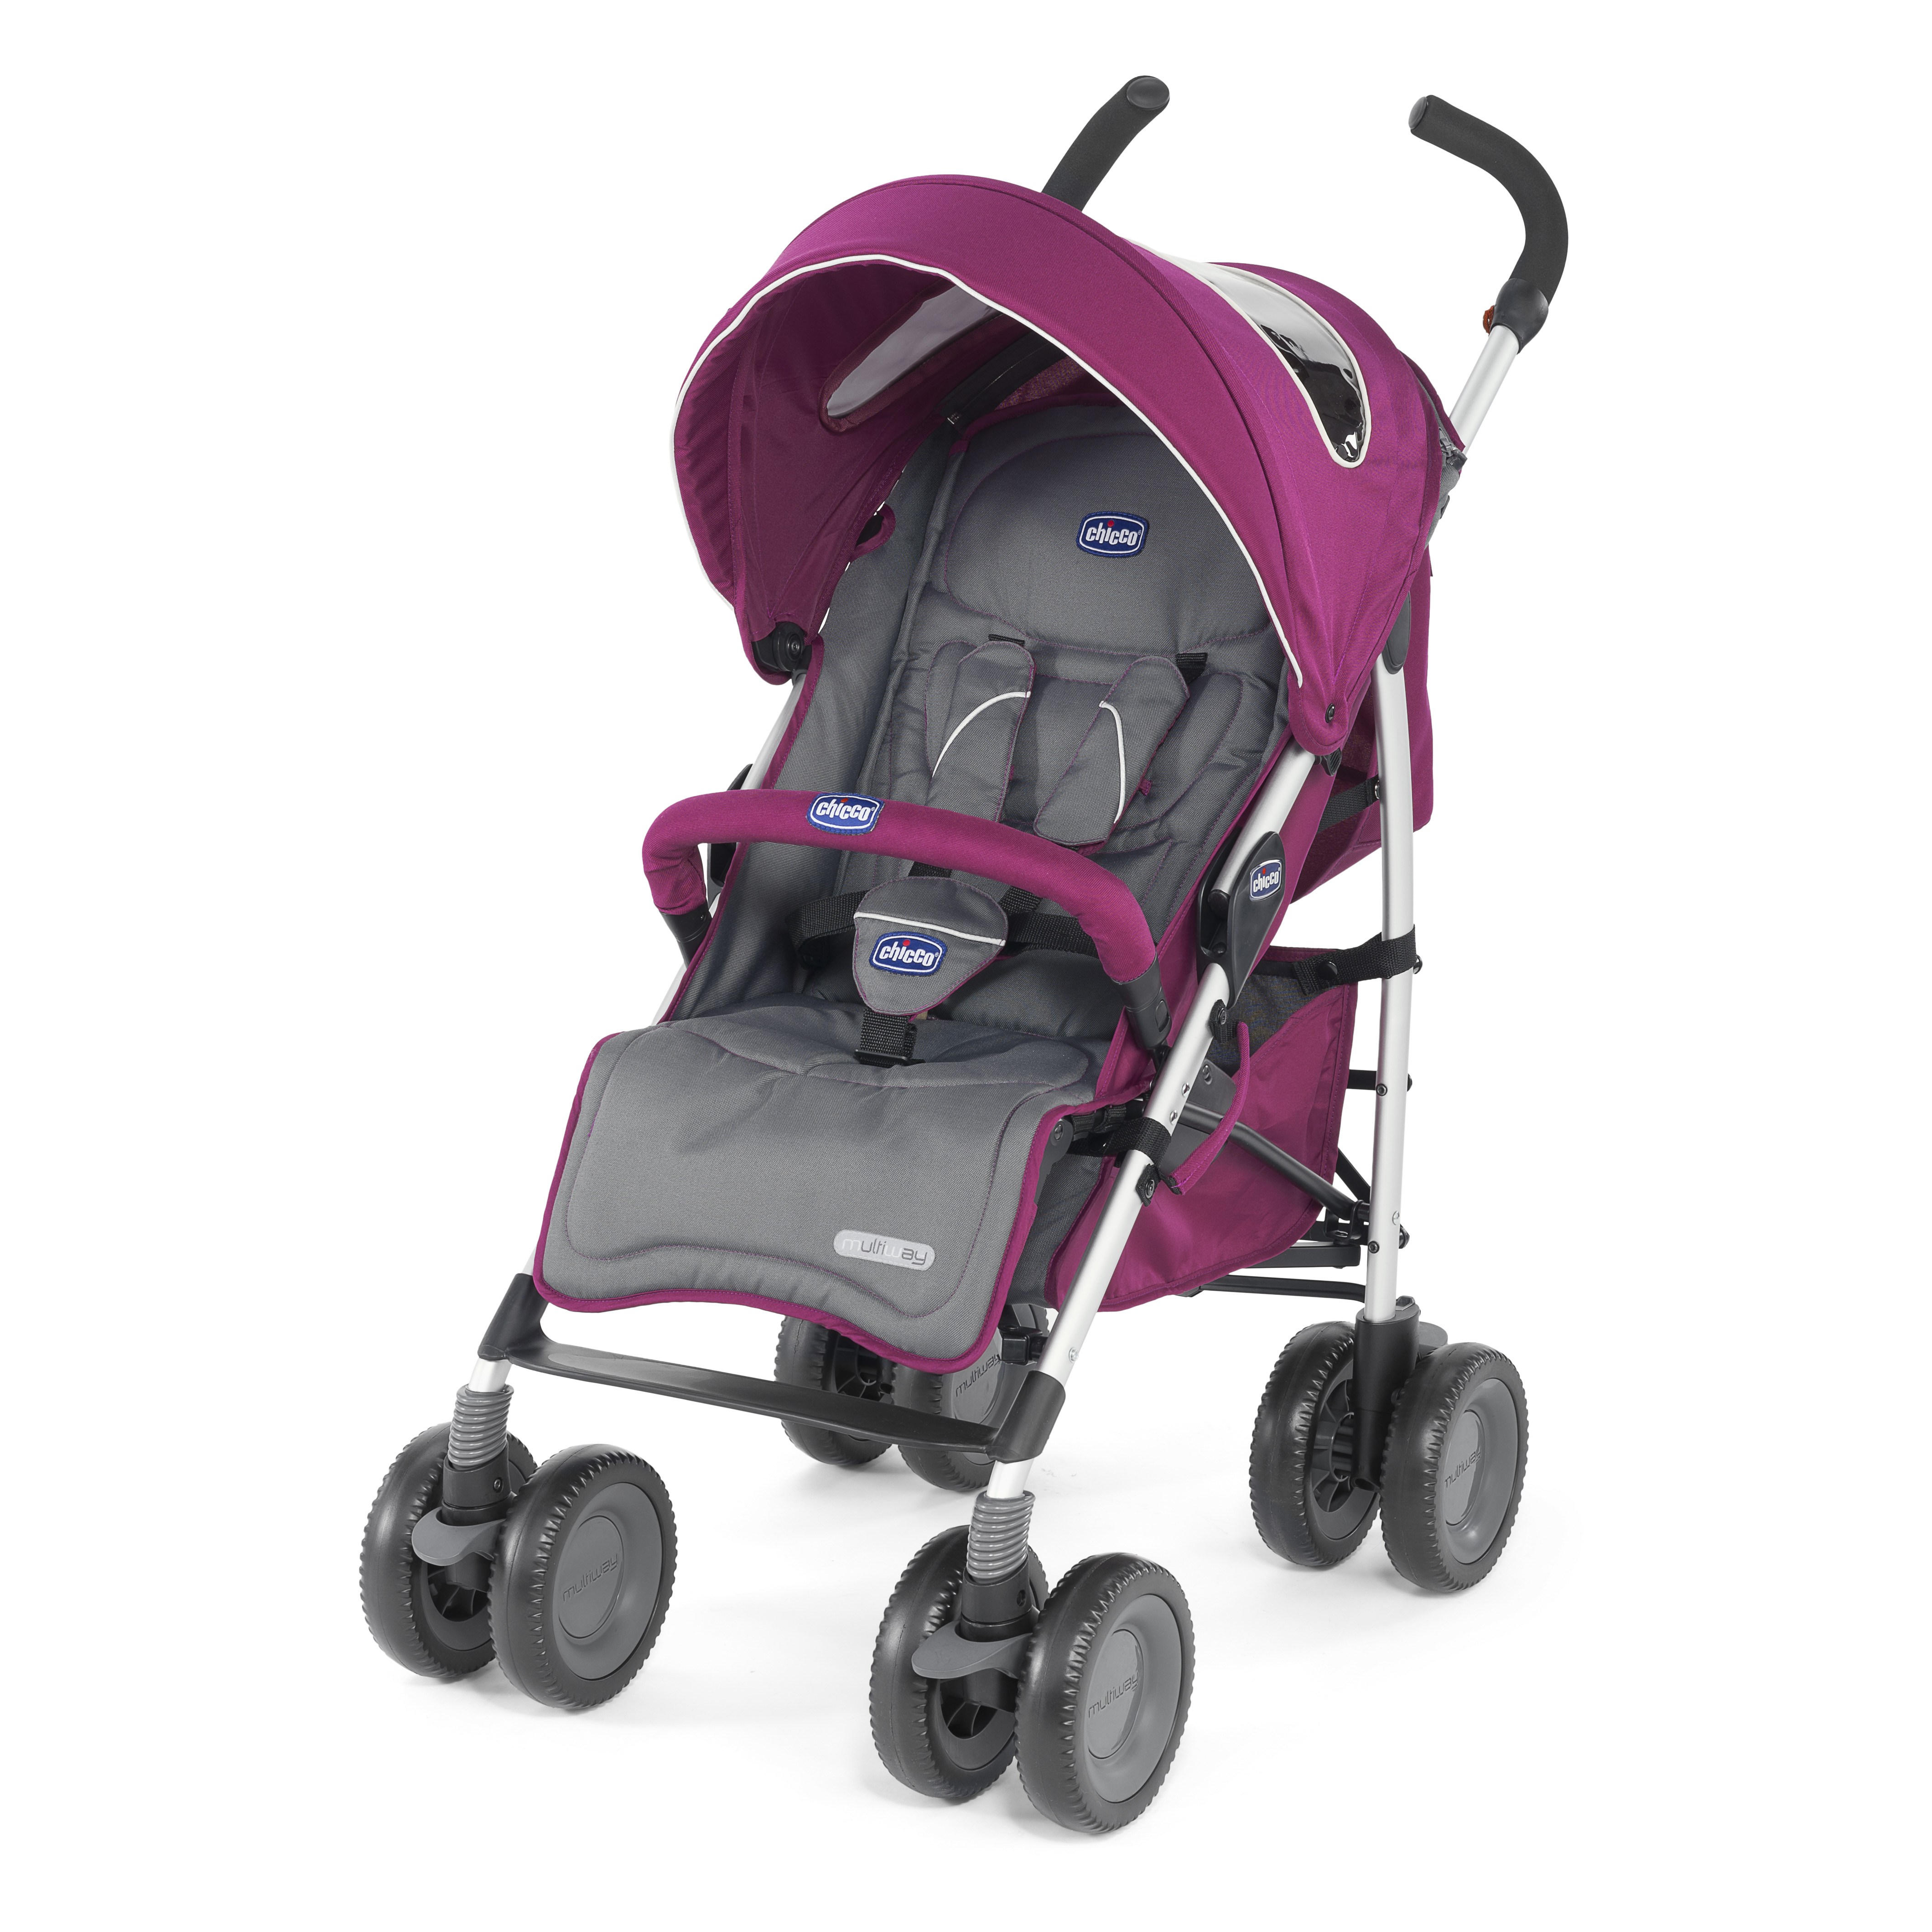 Chicco MultiWay Evo 2016 provence